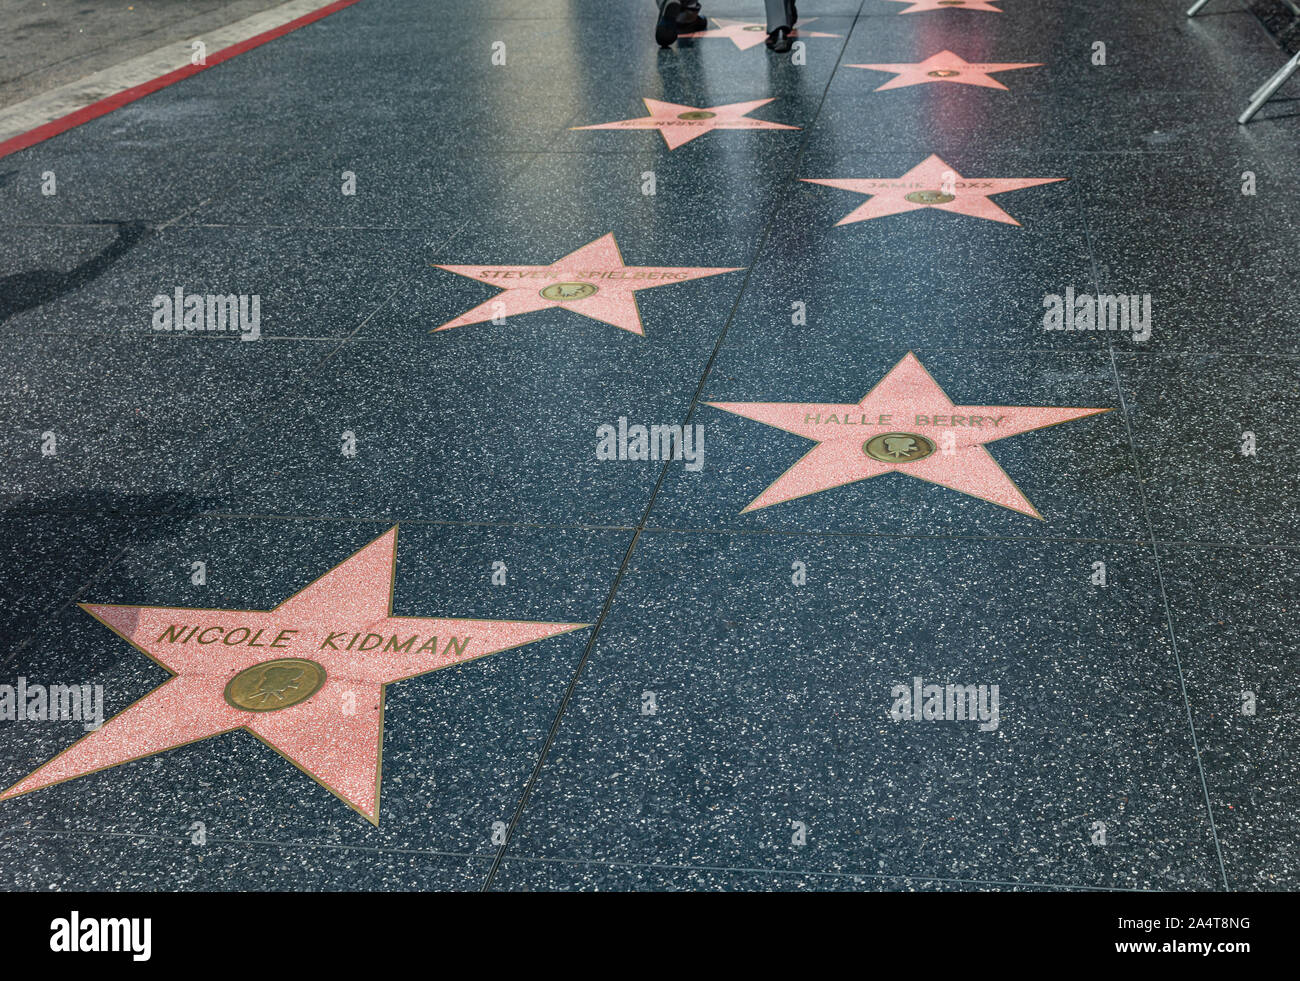 Los Angeles, California, USA. May 31, 2019. The LA Hollywood Walk of Fame. The brass stars that embedded in the sidewalks is a remembrance of celebrit Stock Photo